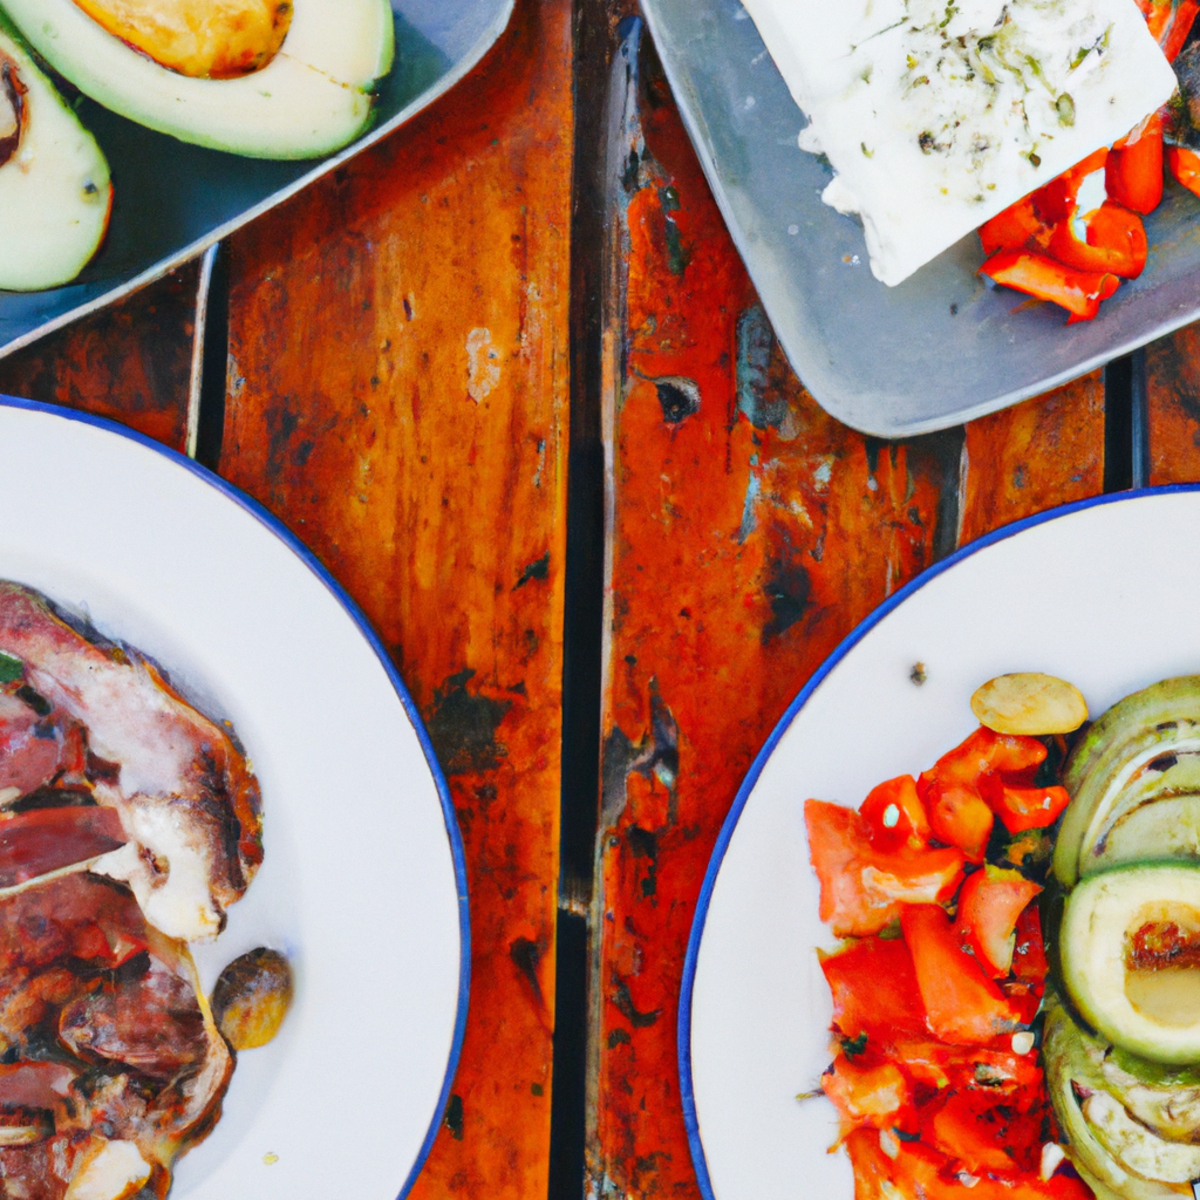 The photo shows a wooden table with two plates of food placed side by side. On the left plate, there is a colorful array of vegetables such as tomatoes, cucumbers, bell peppers, and olives, drizzled with olive oil and sprinkled with feta cheese. On the right plate, there is a juicy steak with a side of bacon and avocado slices, all cooked to perfection. In the background, there is a glass of red wine and a bottle of olive oil, representing the Mediterranean diet. On the other side, there is a glass of water and a jar of coconut oil, representing the Keto diet. The photo captures the essence of the two diets, showcasing the fresh and vibrant ingredients of the Mediterranean diet and the high-fat, low-carb options of the Keto diet.